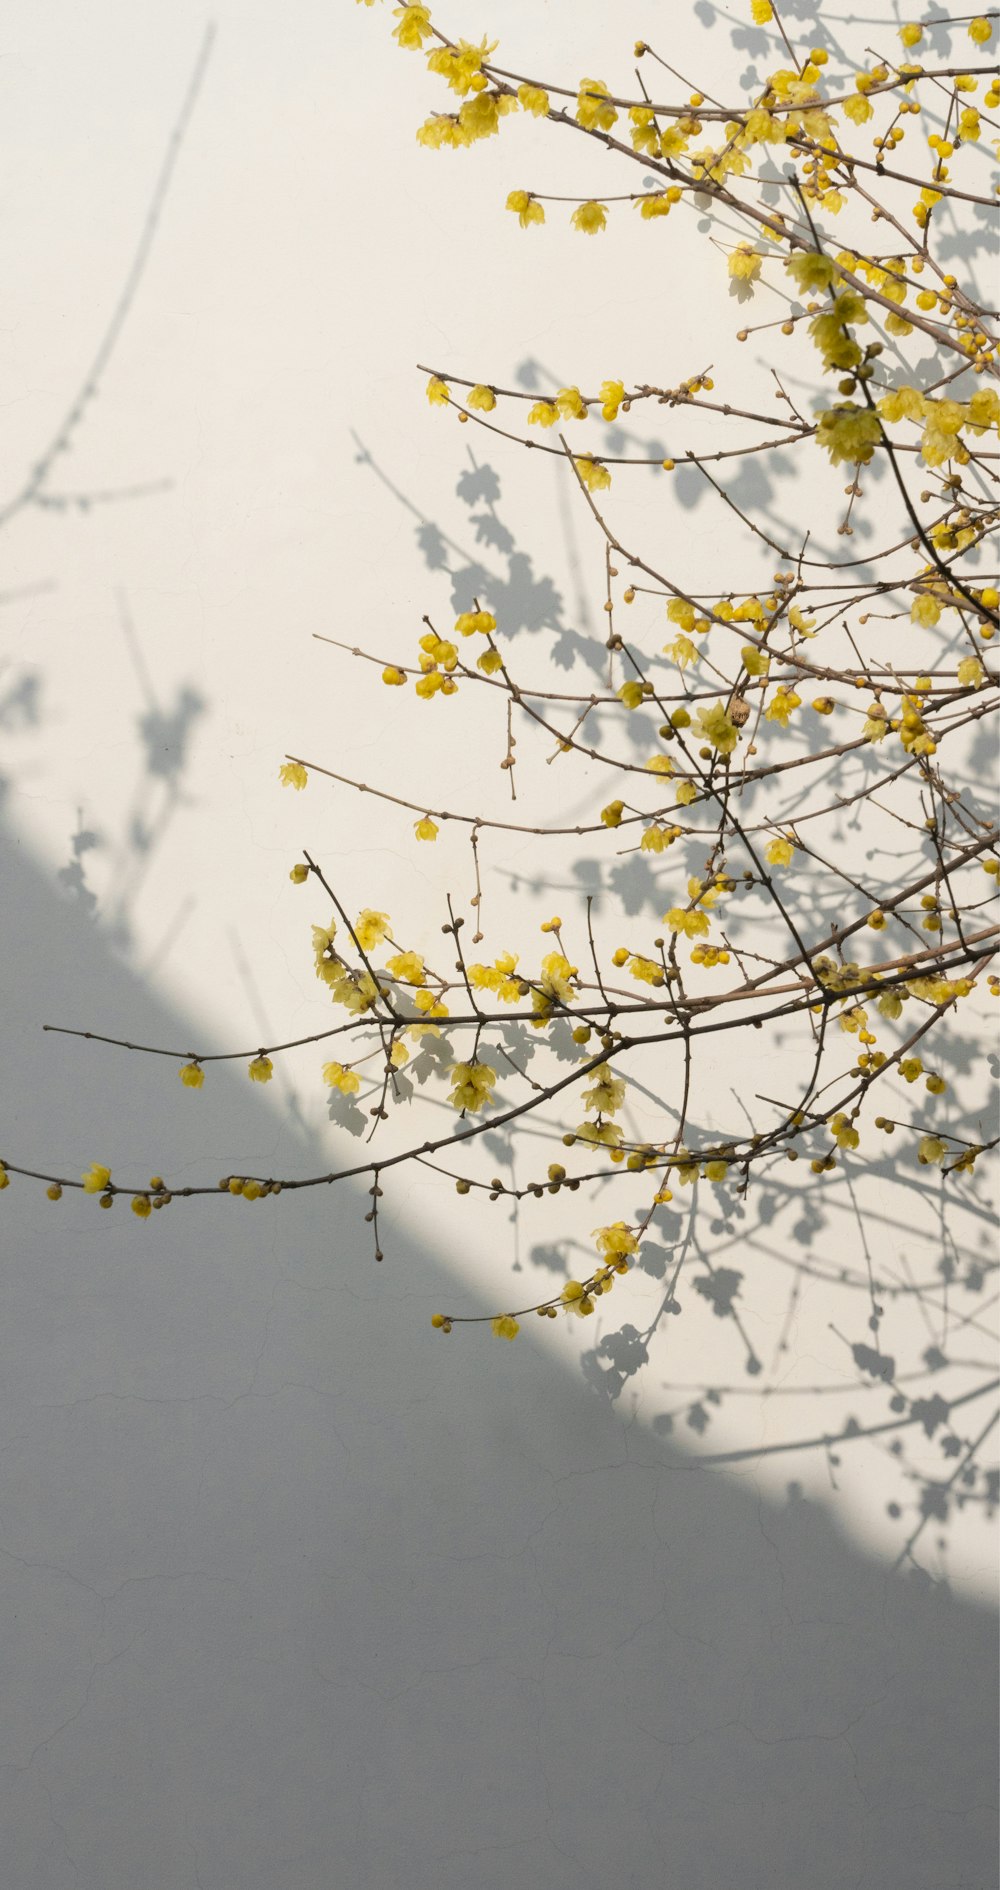 a branch with yellow flowers in the shadow of a wall